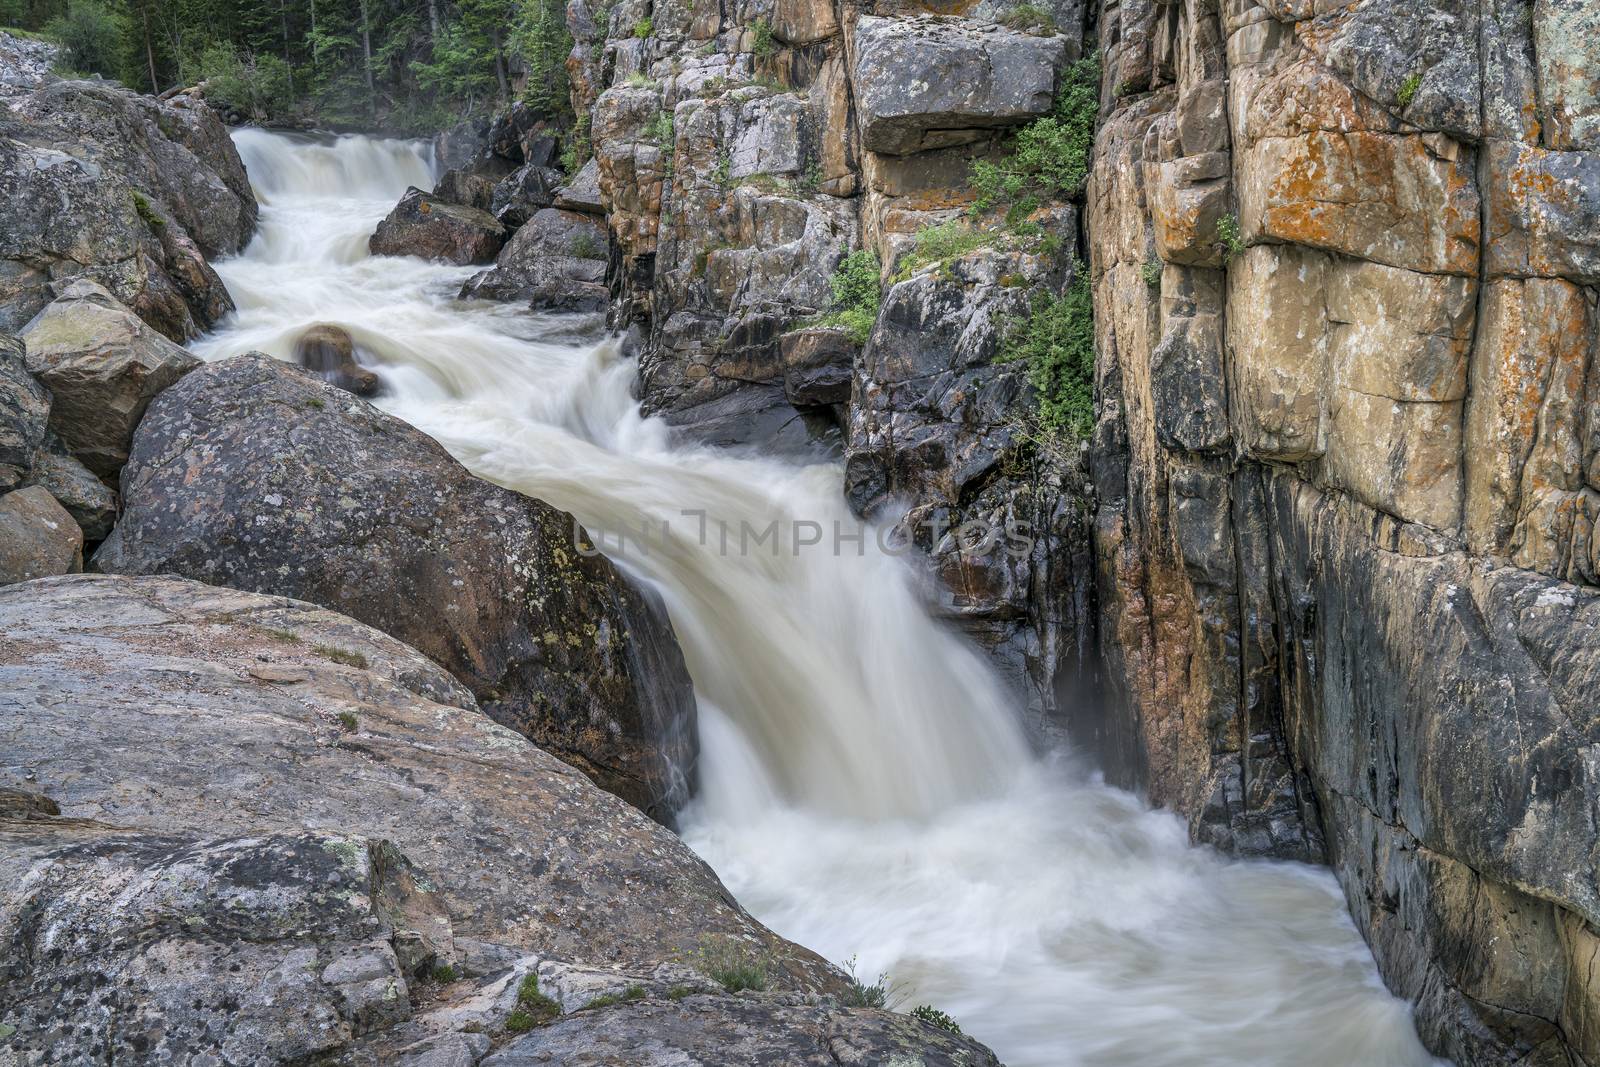 Cache la Poudre River at Poudre Falls in northern Colorado, , early summer scenery with a high flow